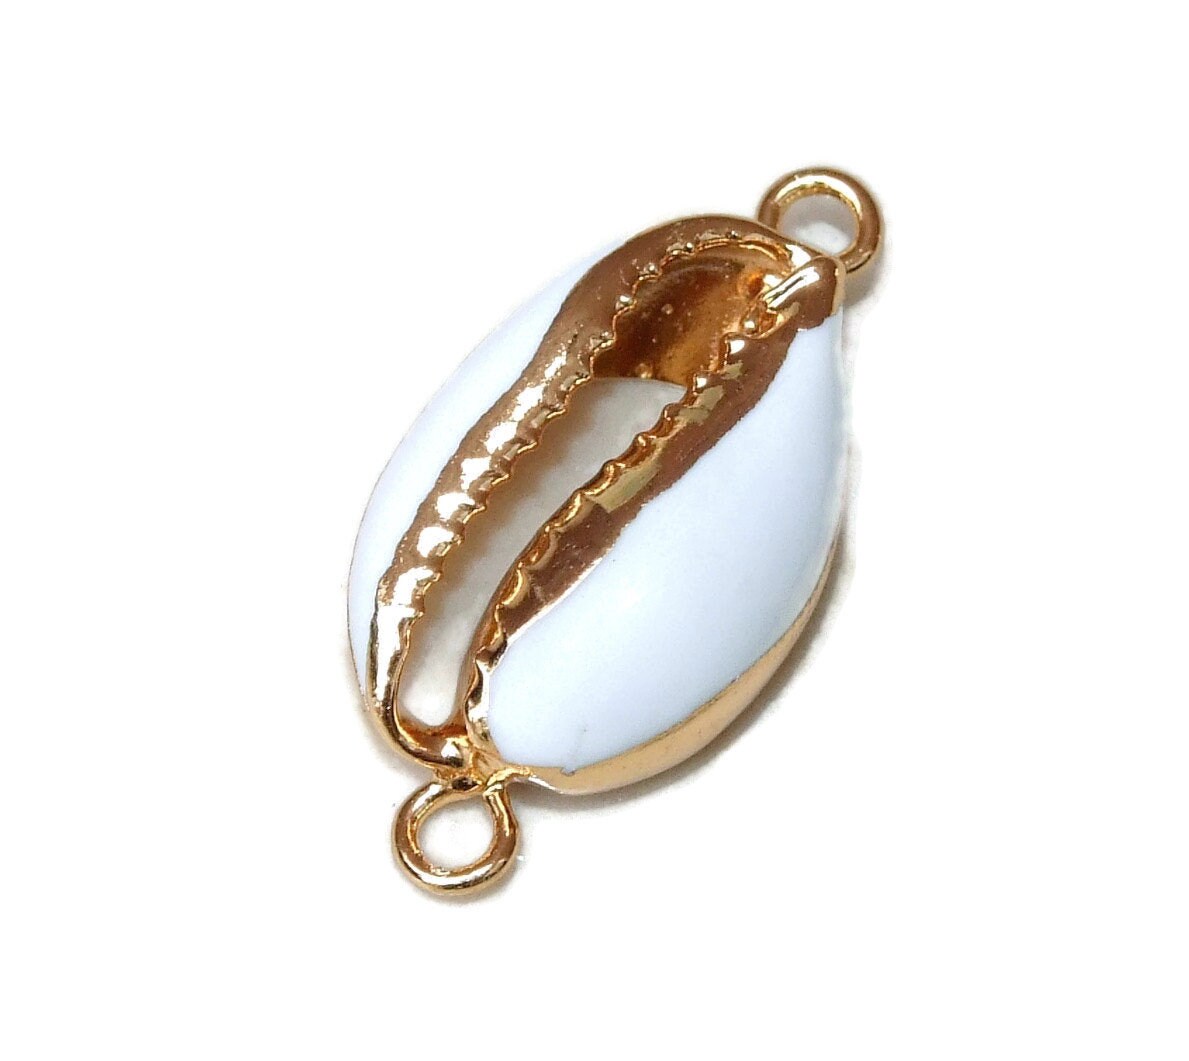 Gold Plated Cowrie Shell Connector, Shell Charm, Cowrie Shell Necklace, Seashell Necklace, Beach Necklace, 24k Gold, Seashell jewelry, 25mm